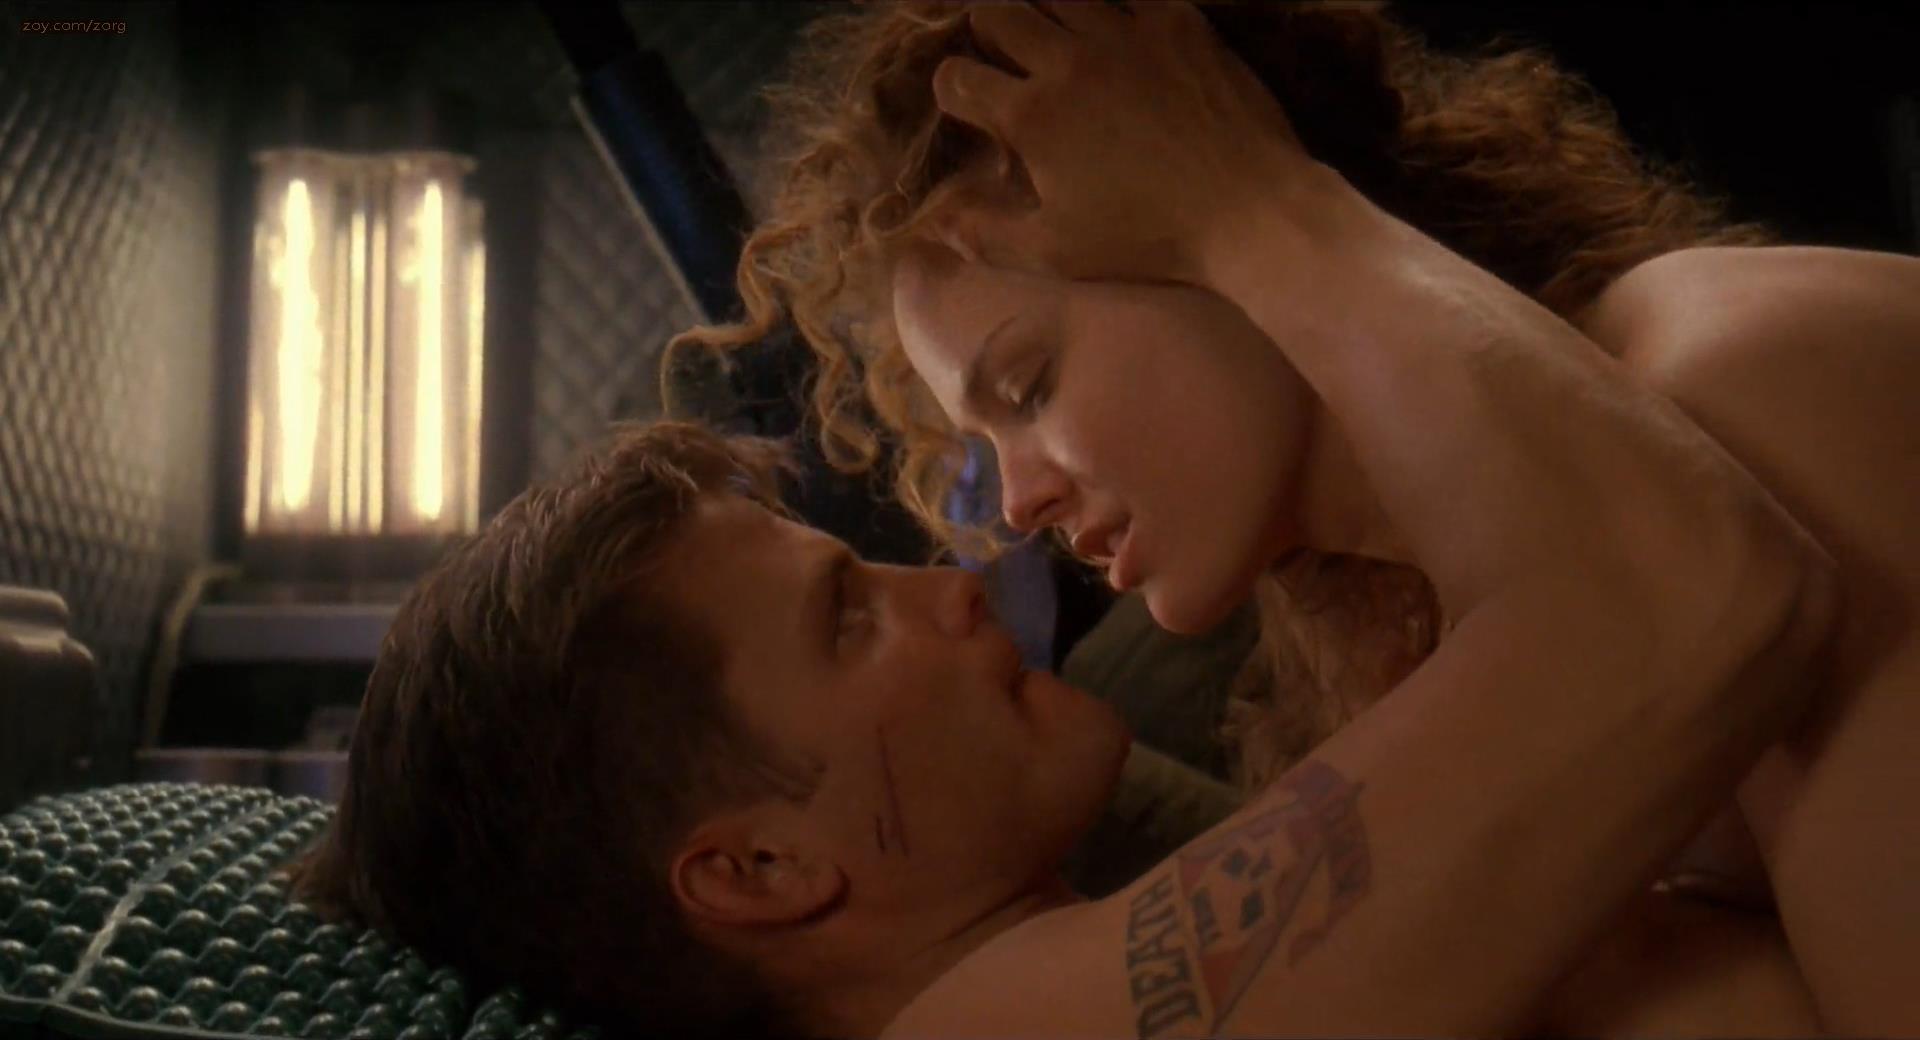 Dina Meyer Nude Topless In The Shower And Some Mild Sex Starship Troopers 1997 Hd1080p